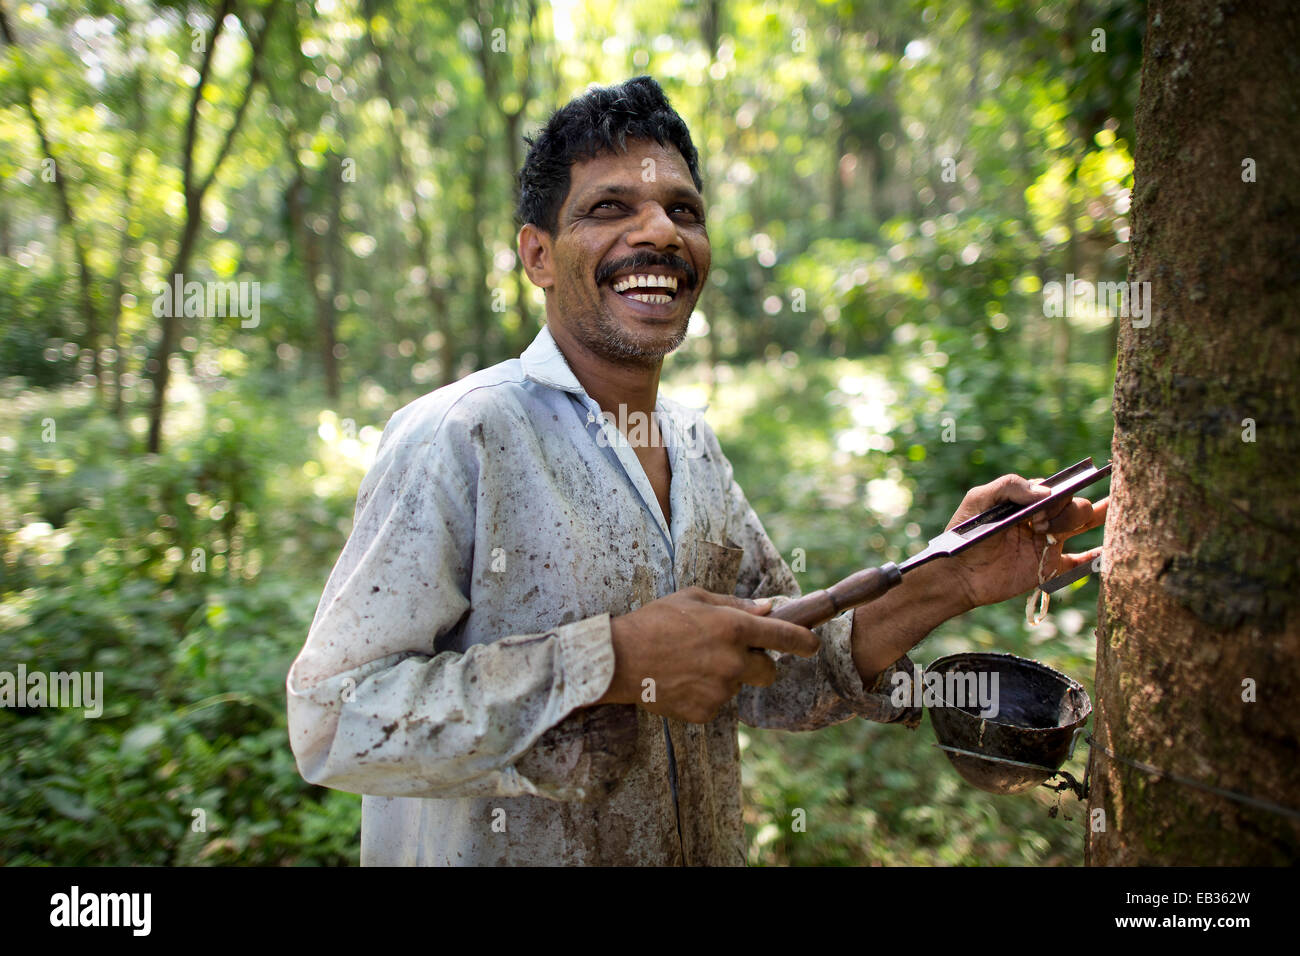 Smiling worker on a natural rubber plantation, standing next to a Rubber Tree (Hevea brasiliensis), Peermade, Kerala, India Stock Photo